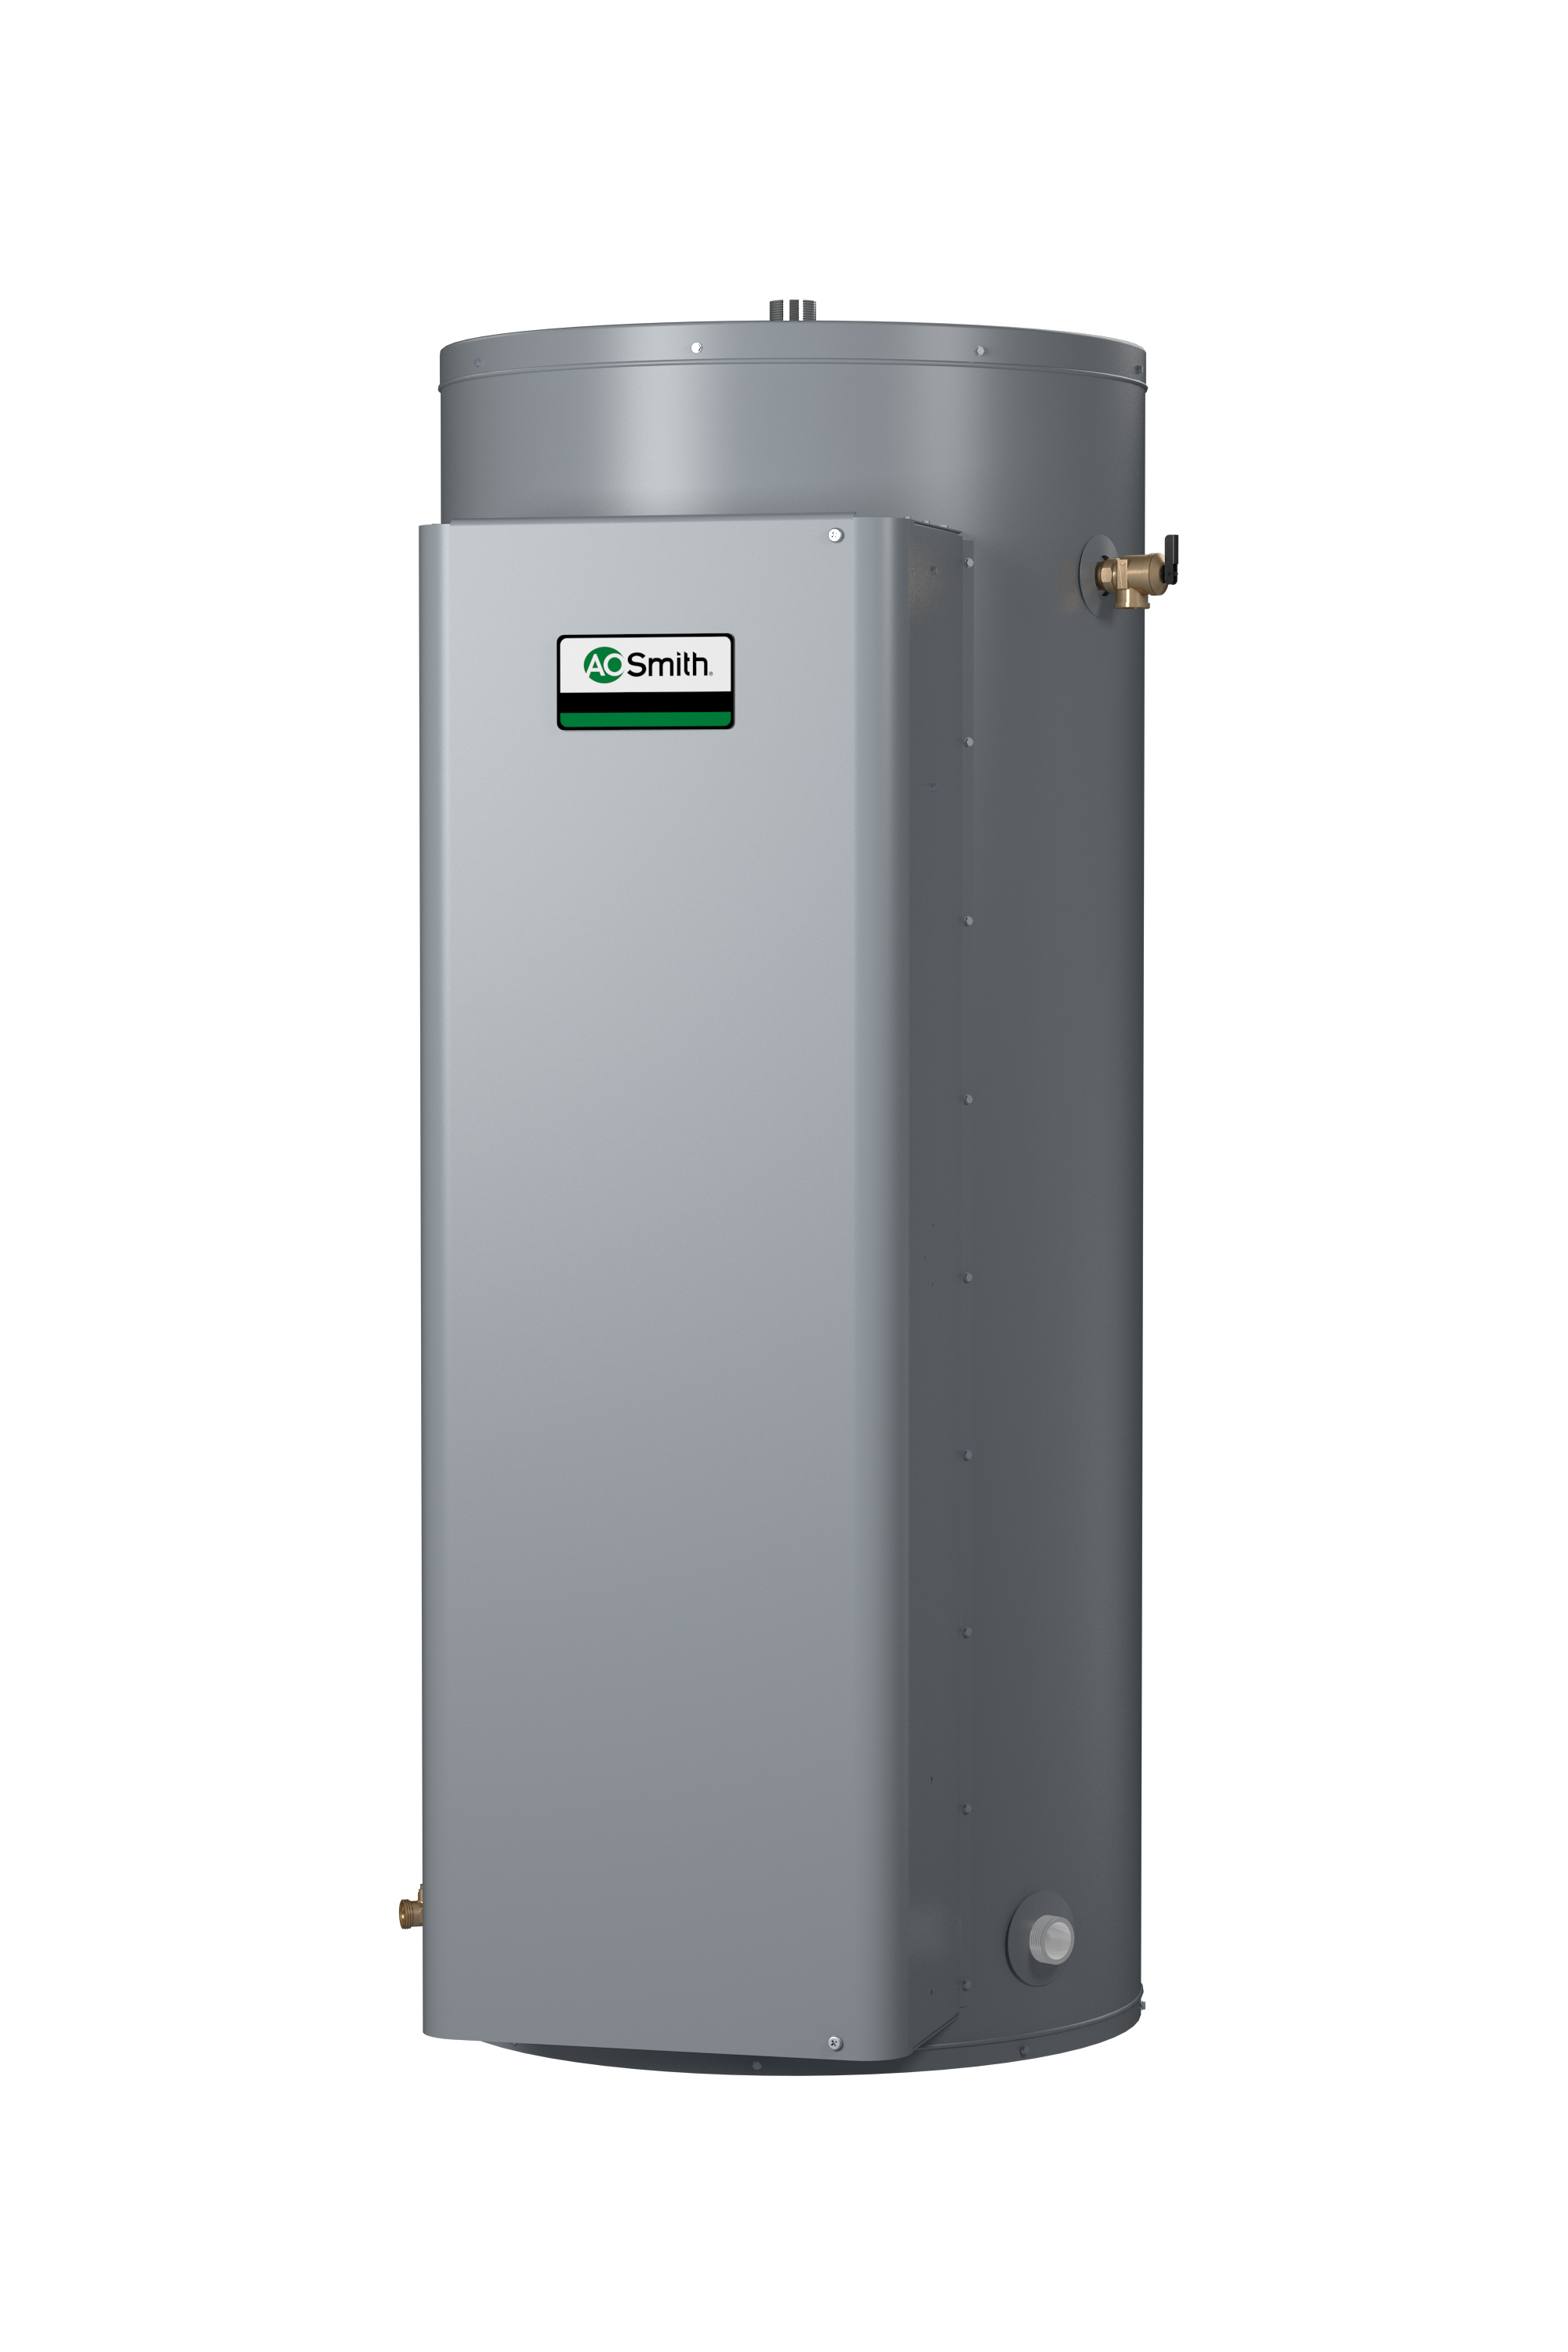 AO SMITH DVE-120-24, 119 GALLONS, 24.0KW, 208 VOLT, 66.6 AMPS, 3 PHASE, 6 ELEMENT, GOLD Xi SERIES HEAVY DUTY COMMERCIAL ELECTRIC WATER HEATER